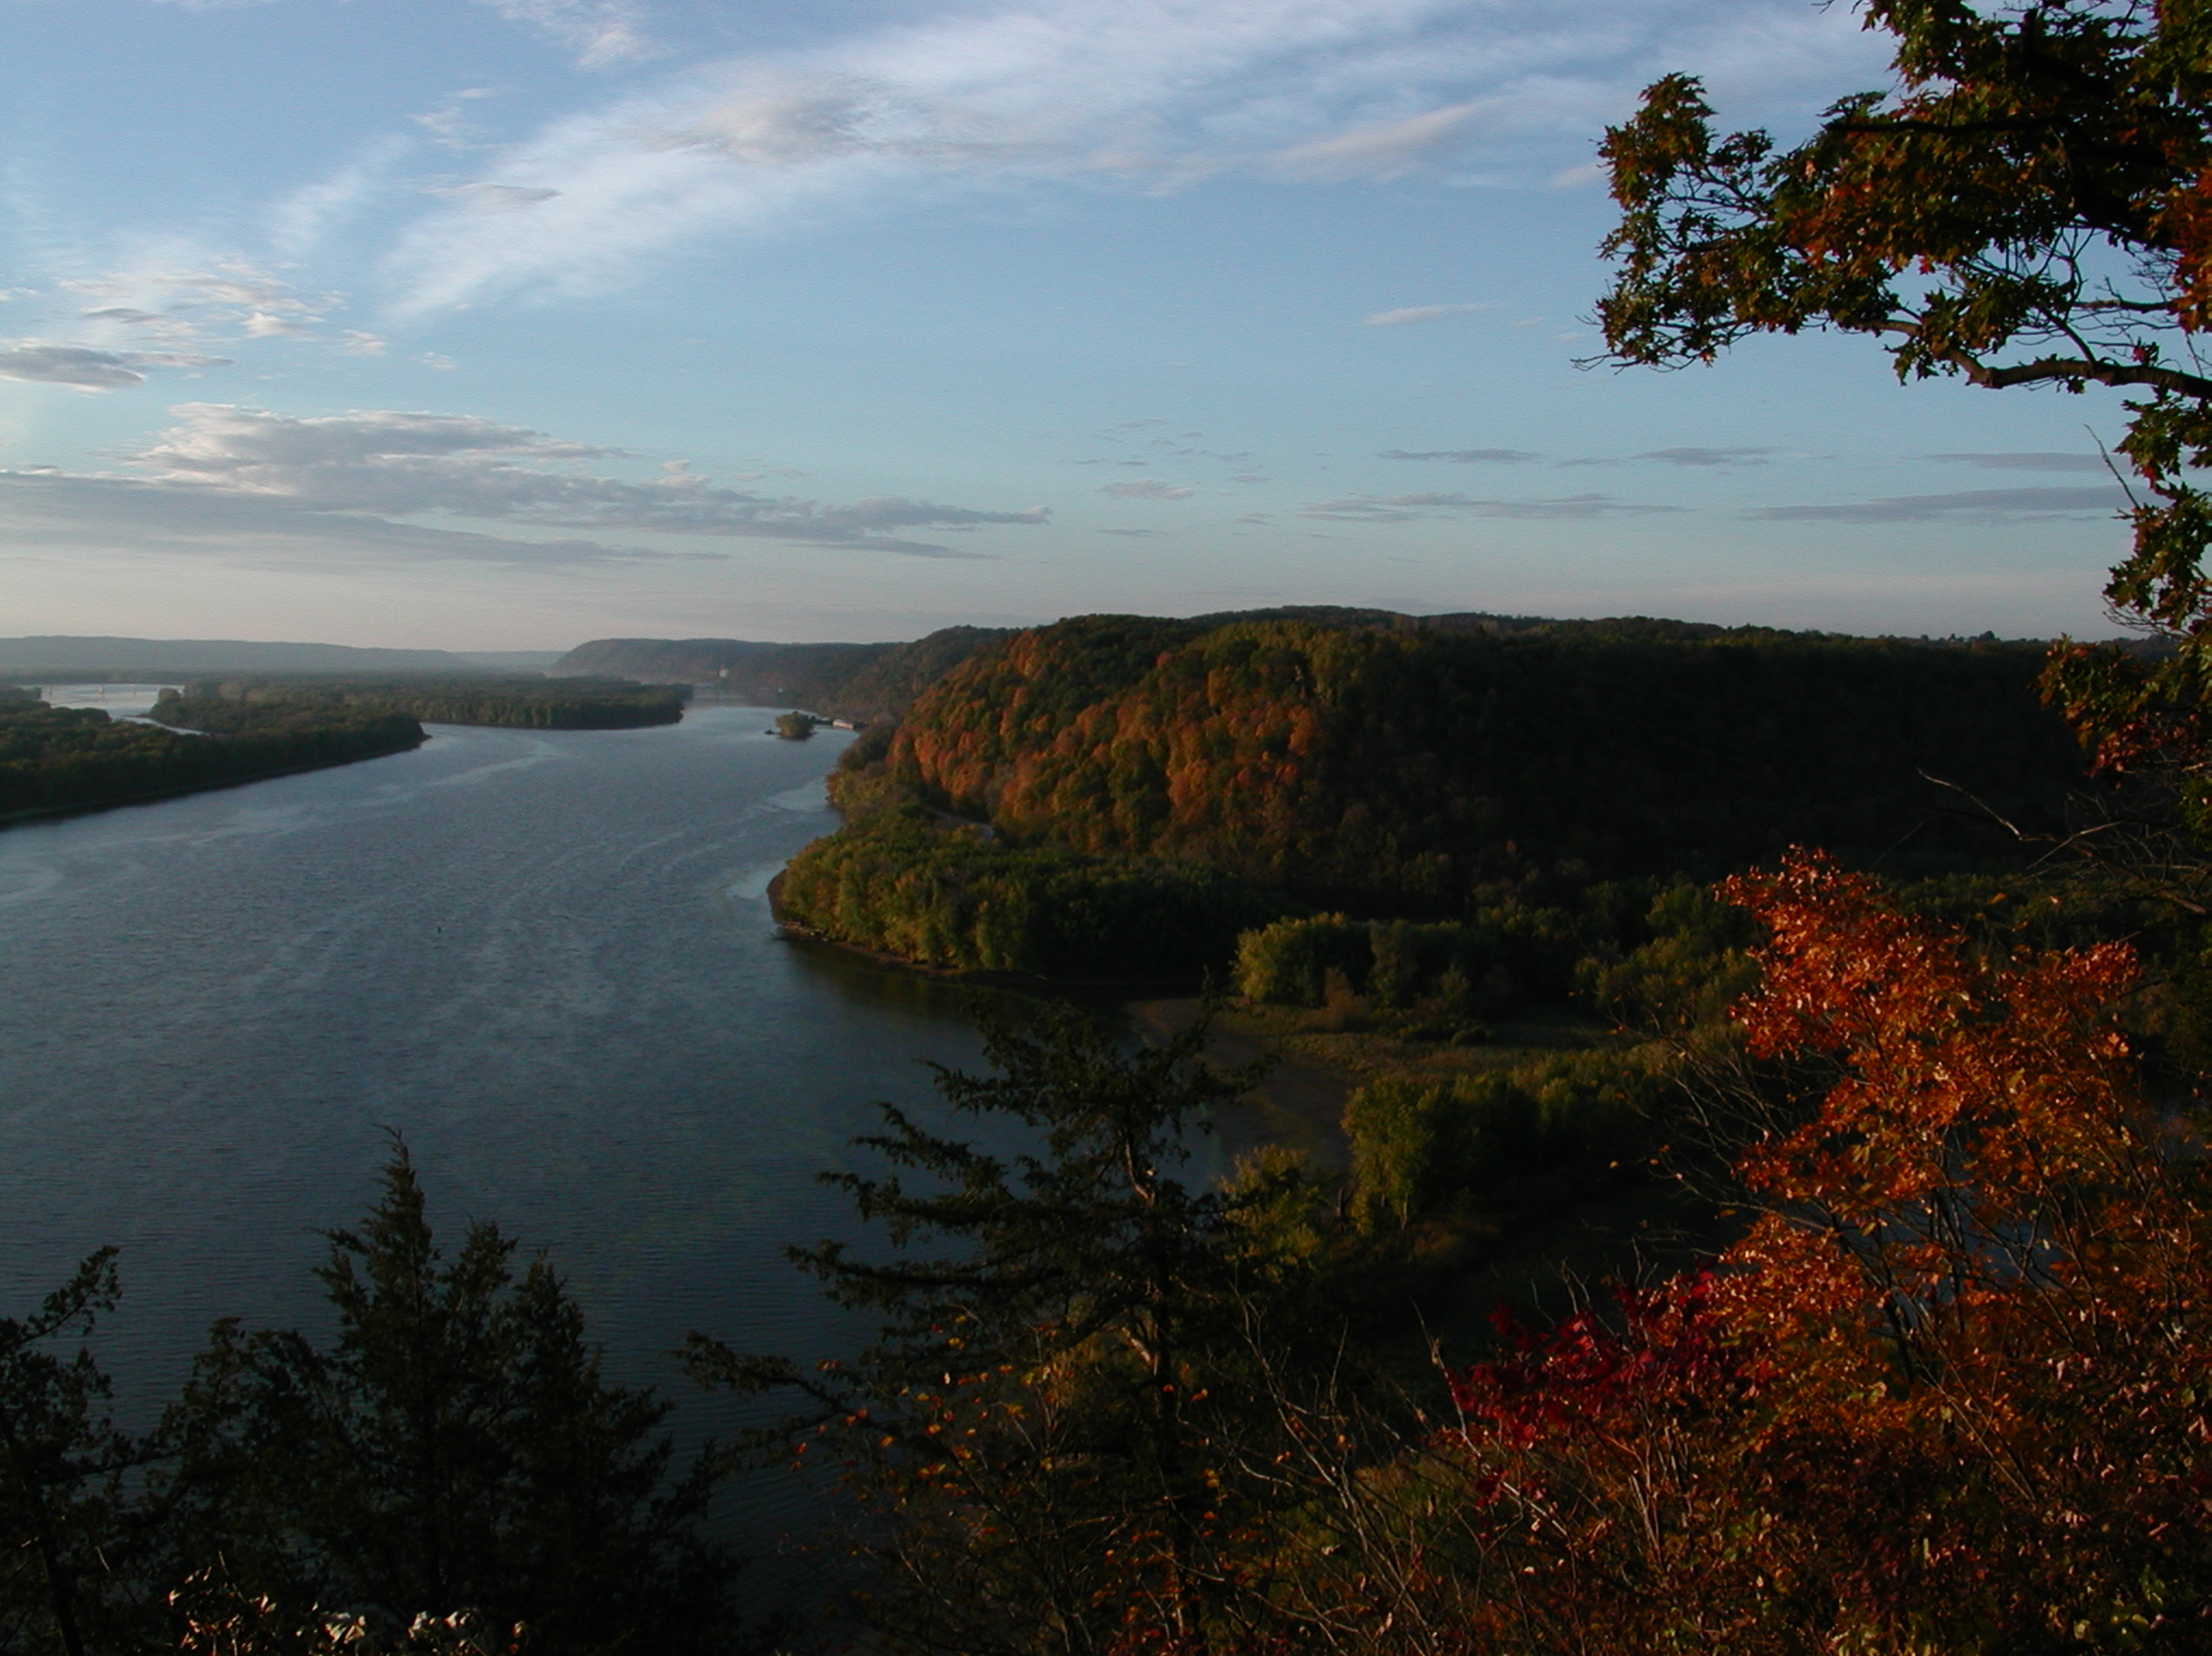 Scenic view of the steep bluffs adjacent to the Mississippi River as trees start to change color.